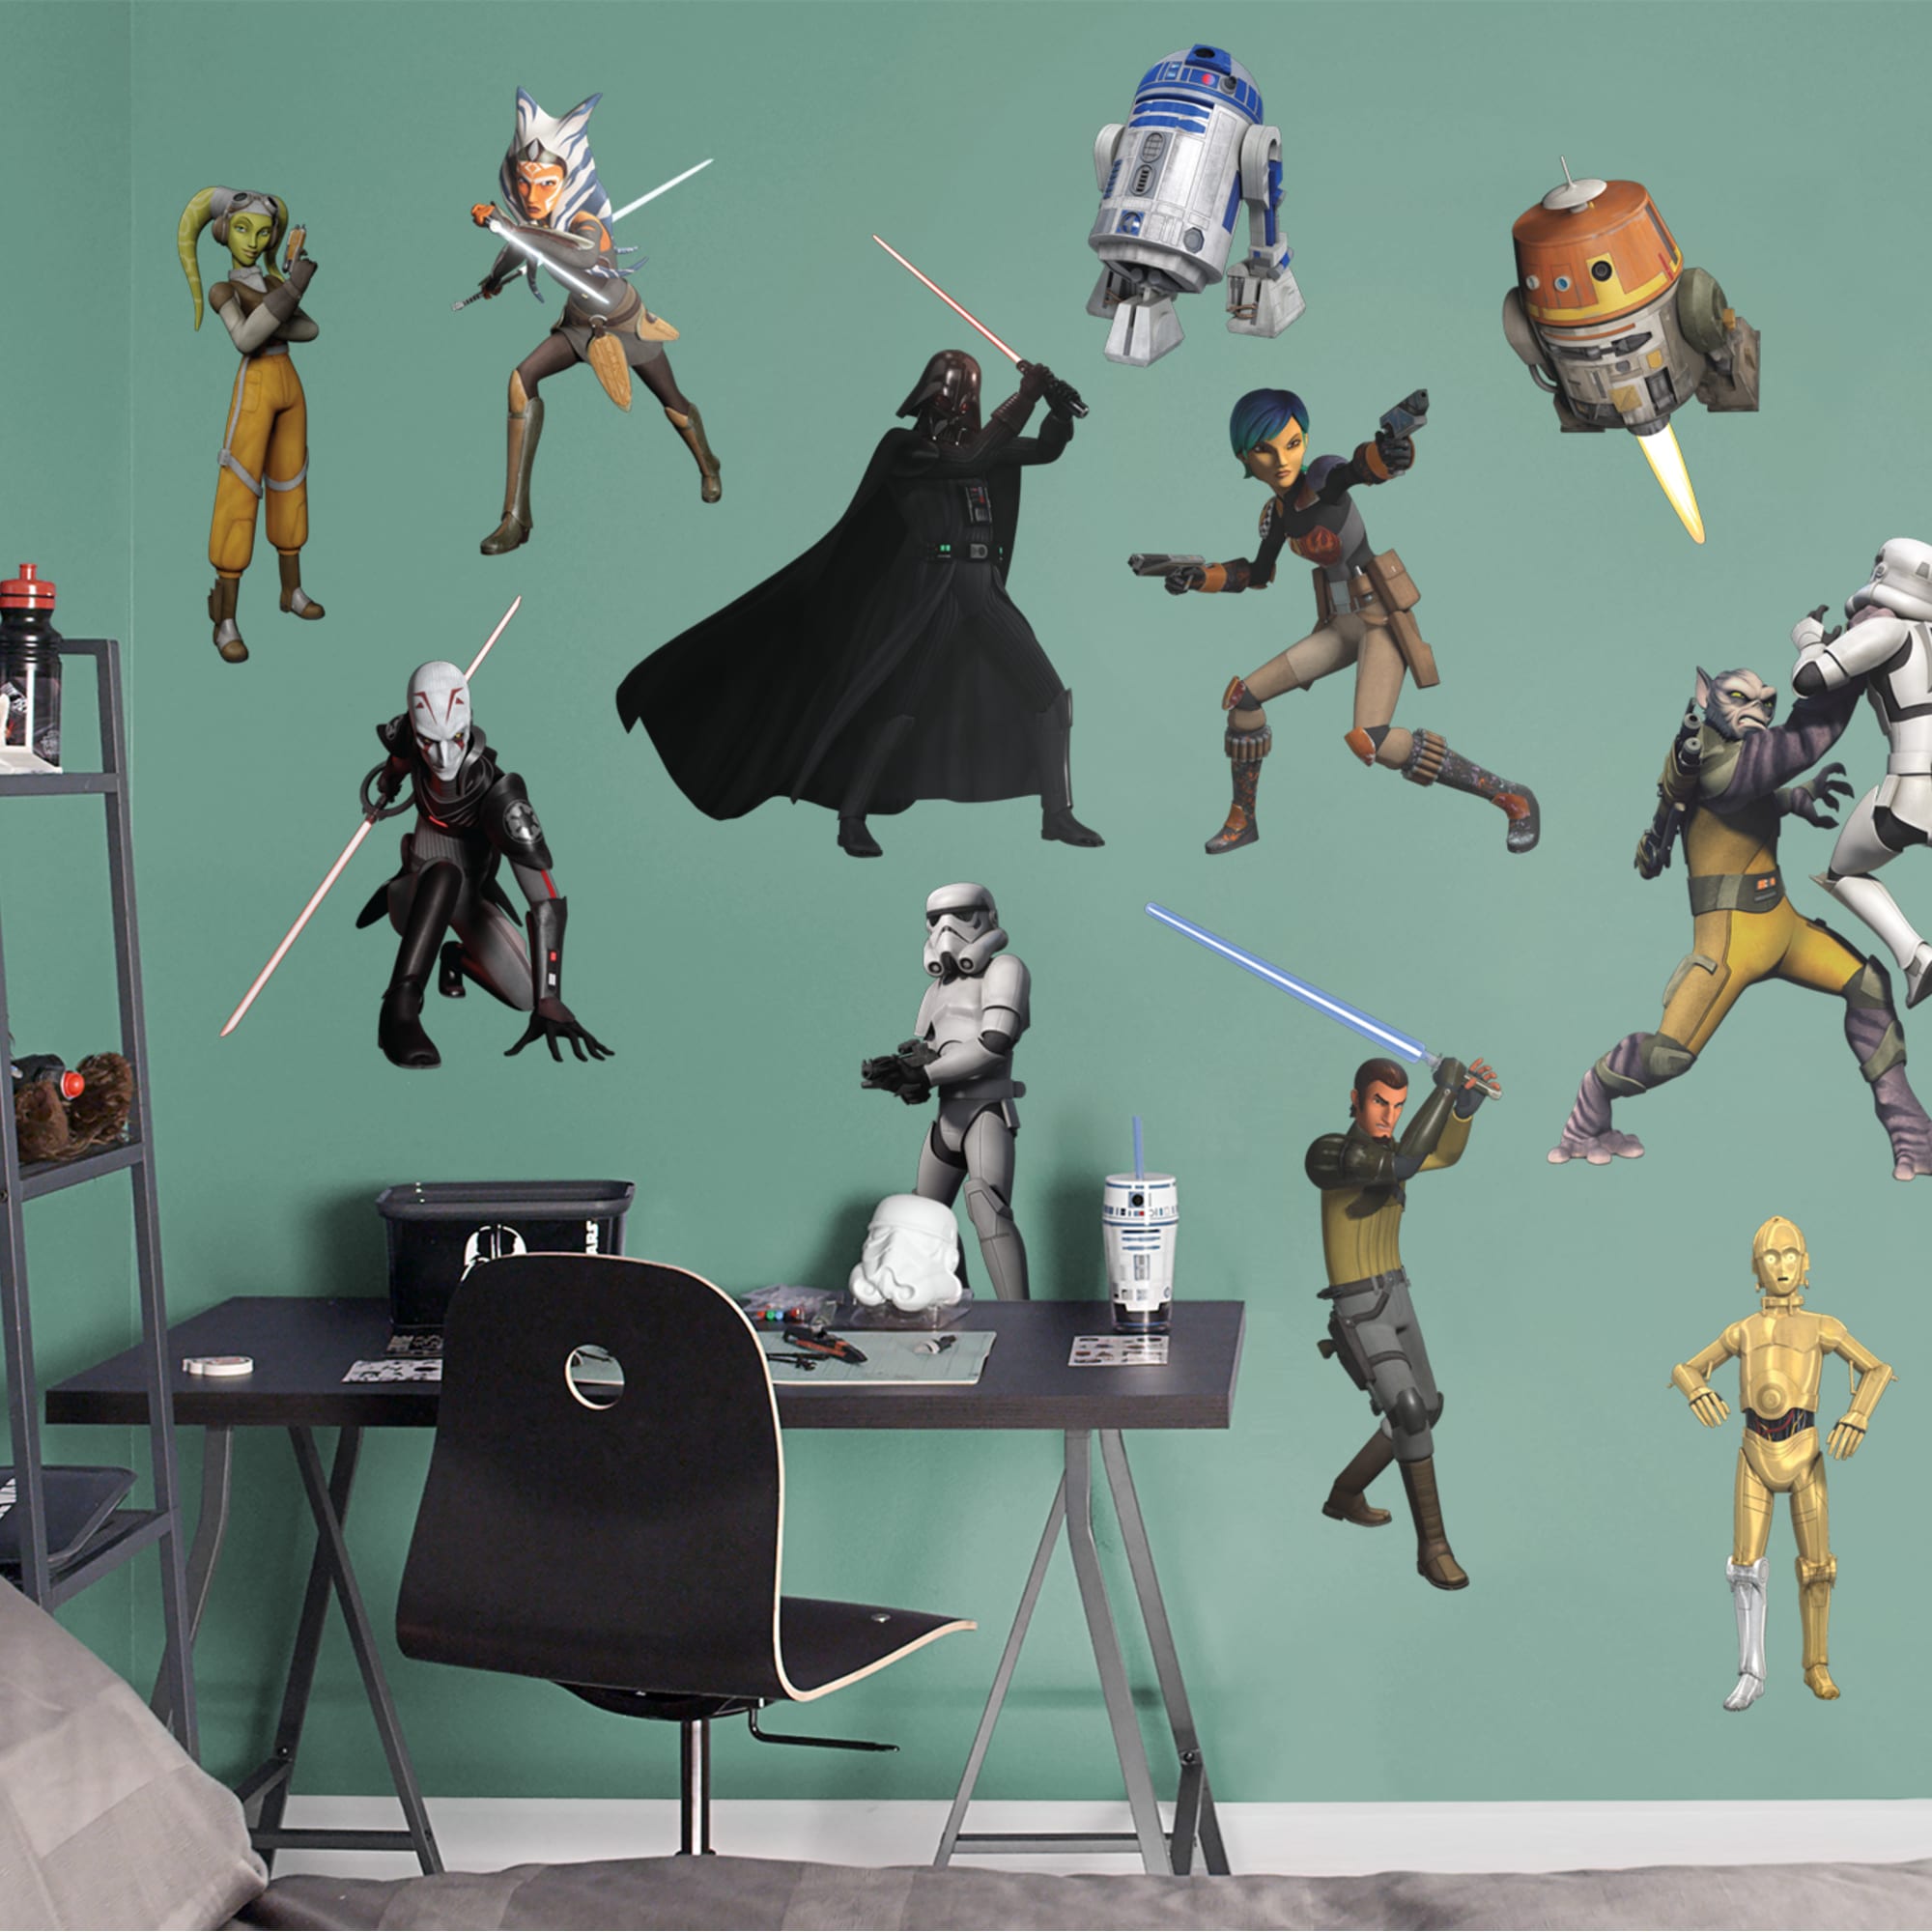 Star Wars: Rebels Characters Collection - Officially Licensed Removable Wall Decal 80.0"W x 53.0"H by Fathead | Vinyl